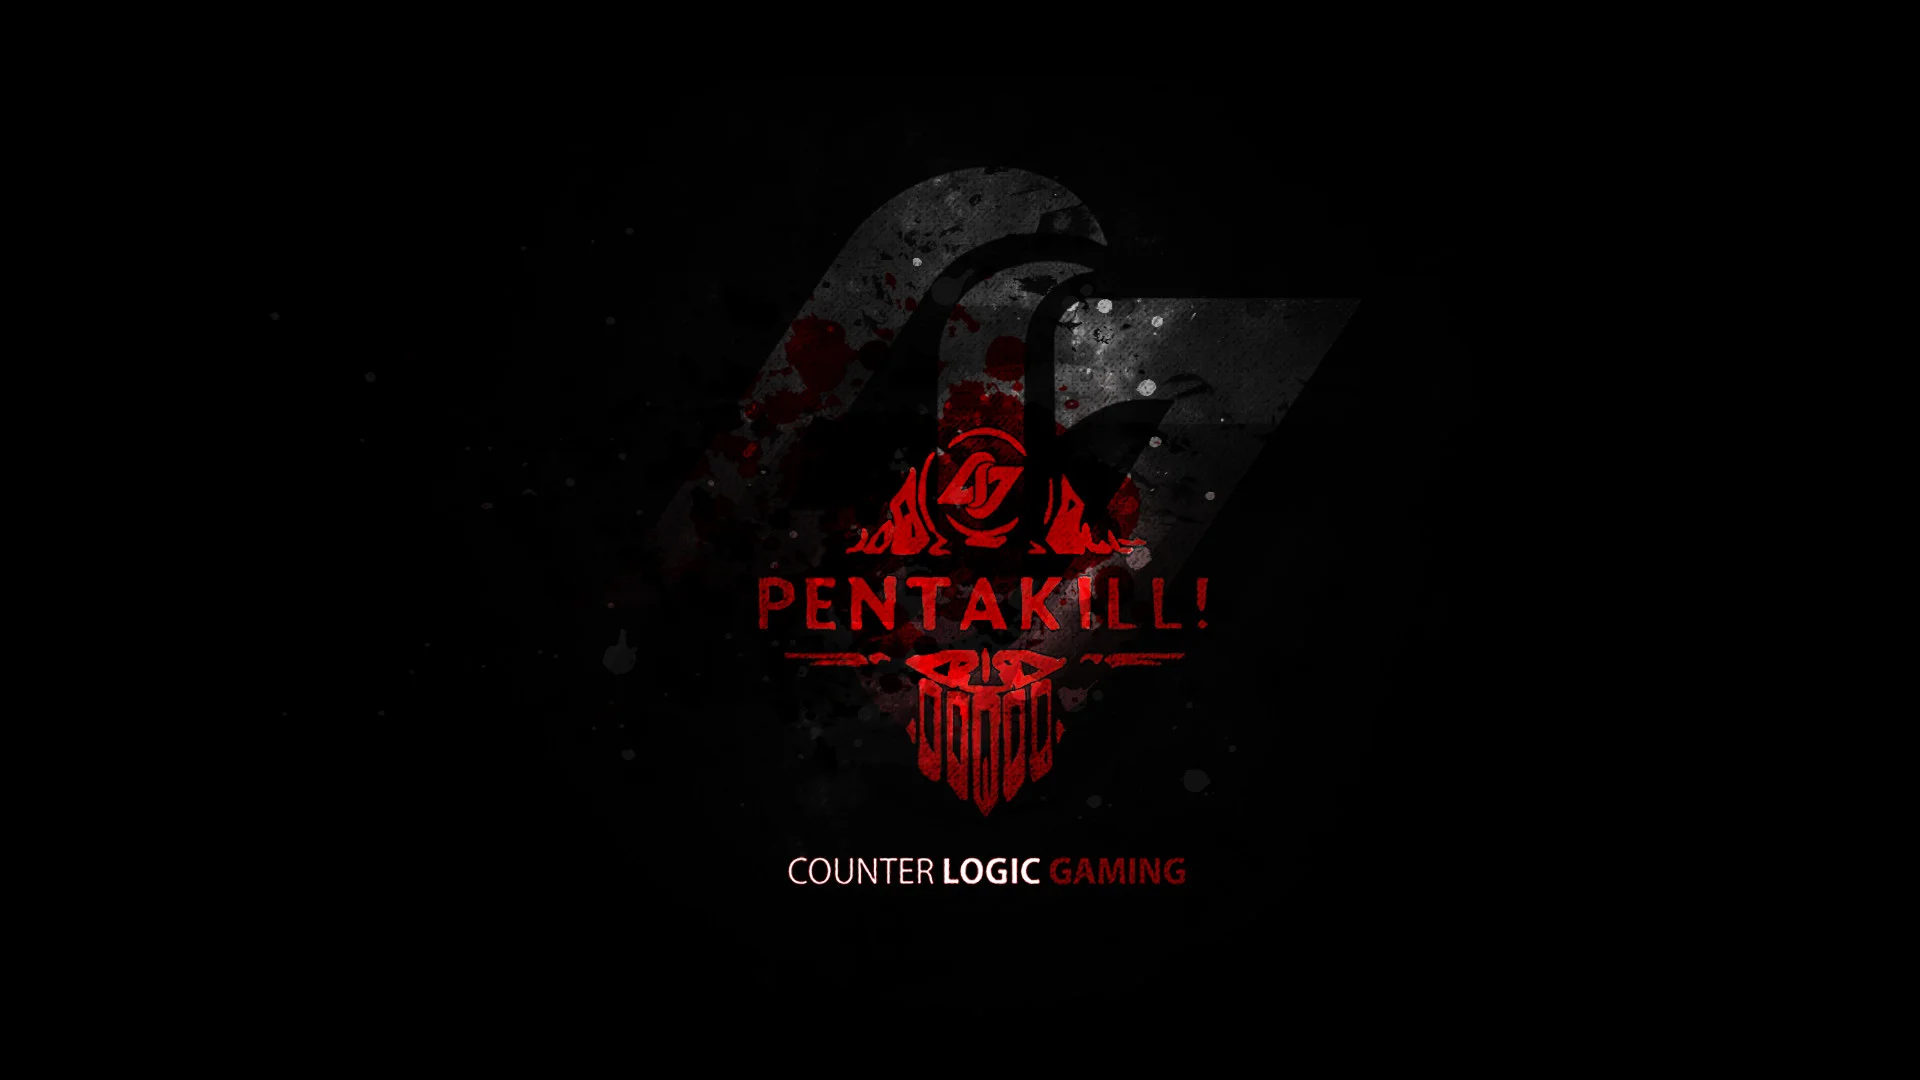 CLG pentakill Wallpaper 1920 by iWreckless CLG pentakill Wallpaper 1920 by iWreckless